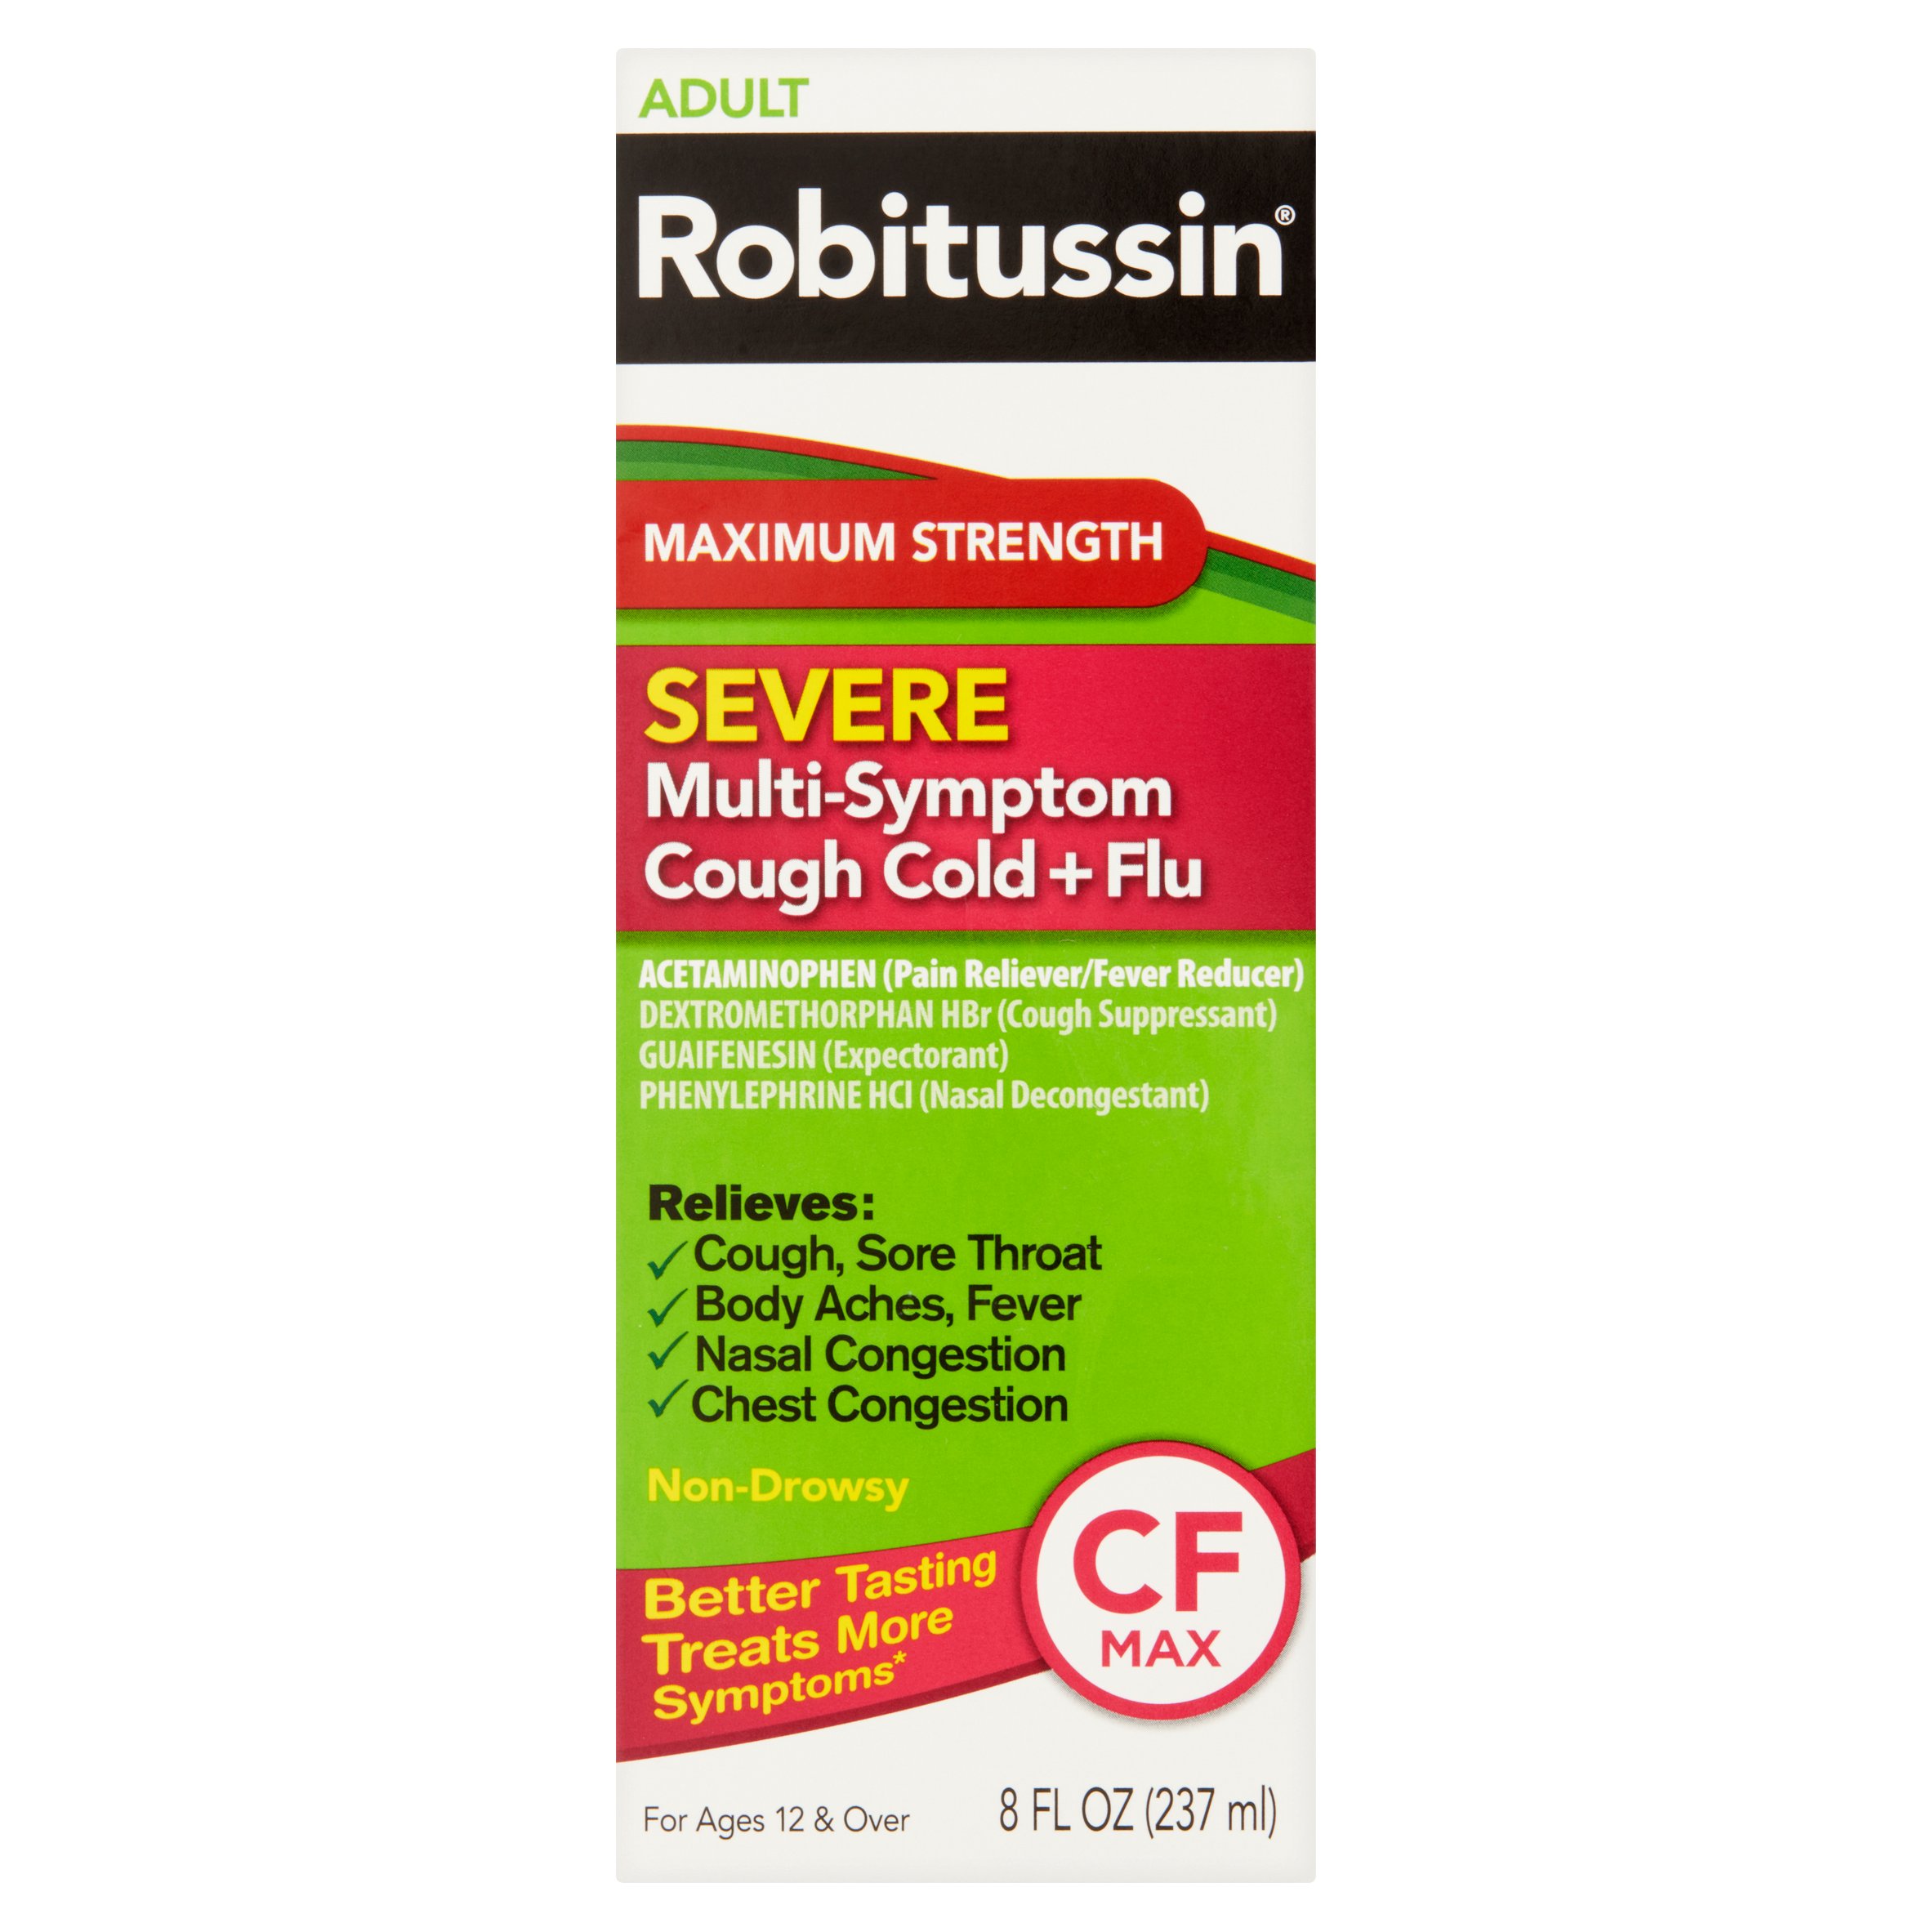 Robitussin Adult Max Strength Severe Cough Cold and Flu Medicine, 8 Fl Oz - image 1 of 5